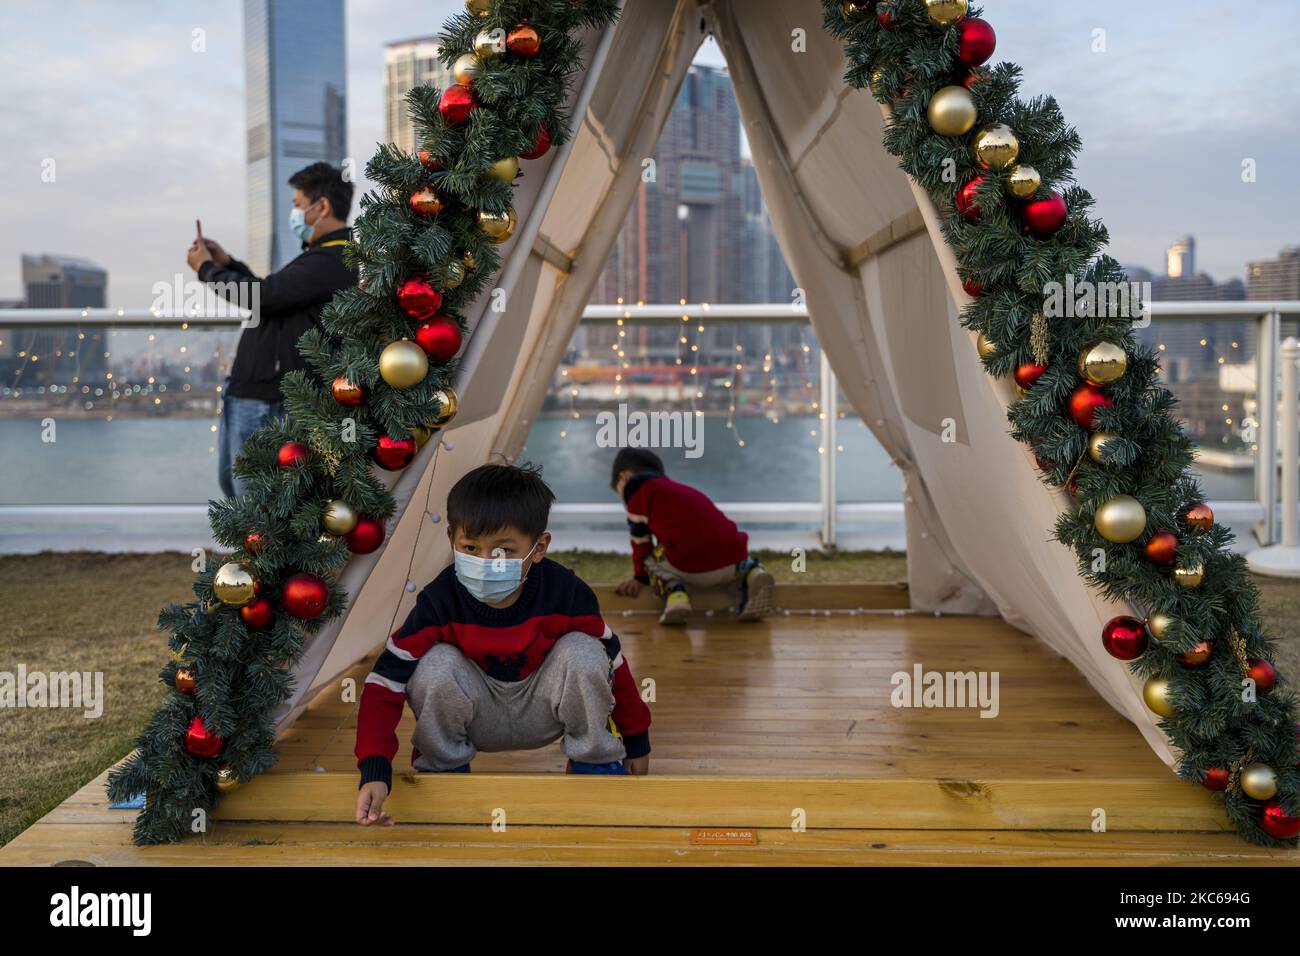 A boy wearying a faec Mask is seen sitting inside a tent at a Christmas display in a shopping mall on December 21, 2020 in Hong Kong, China. Hong Kong has banned flights from the United Kingdom in response to a new variant of Covid-19 discovered there, the new variant is believed to be 70% more transmissible, Hong Kong has also extend its social distancing measure till January 6 next year. (Photo by Vernon Yuen/NurPhoto) Stock Photo